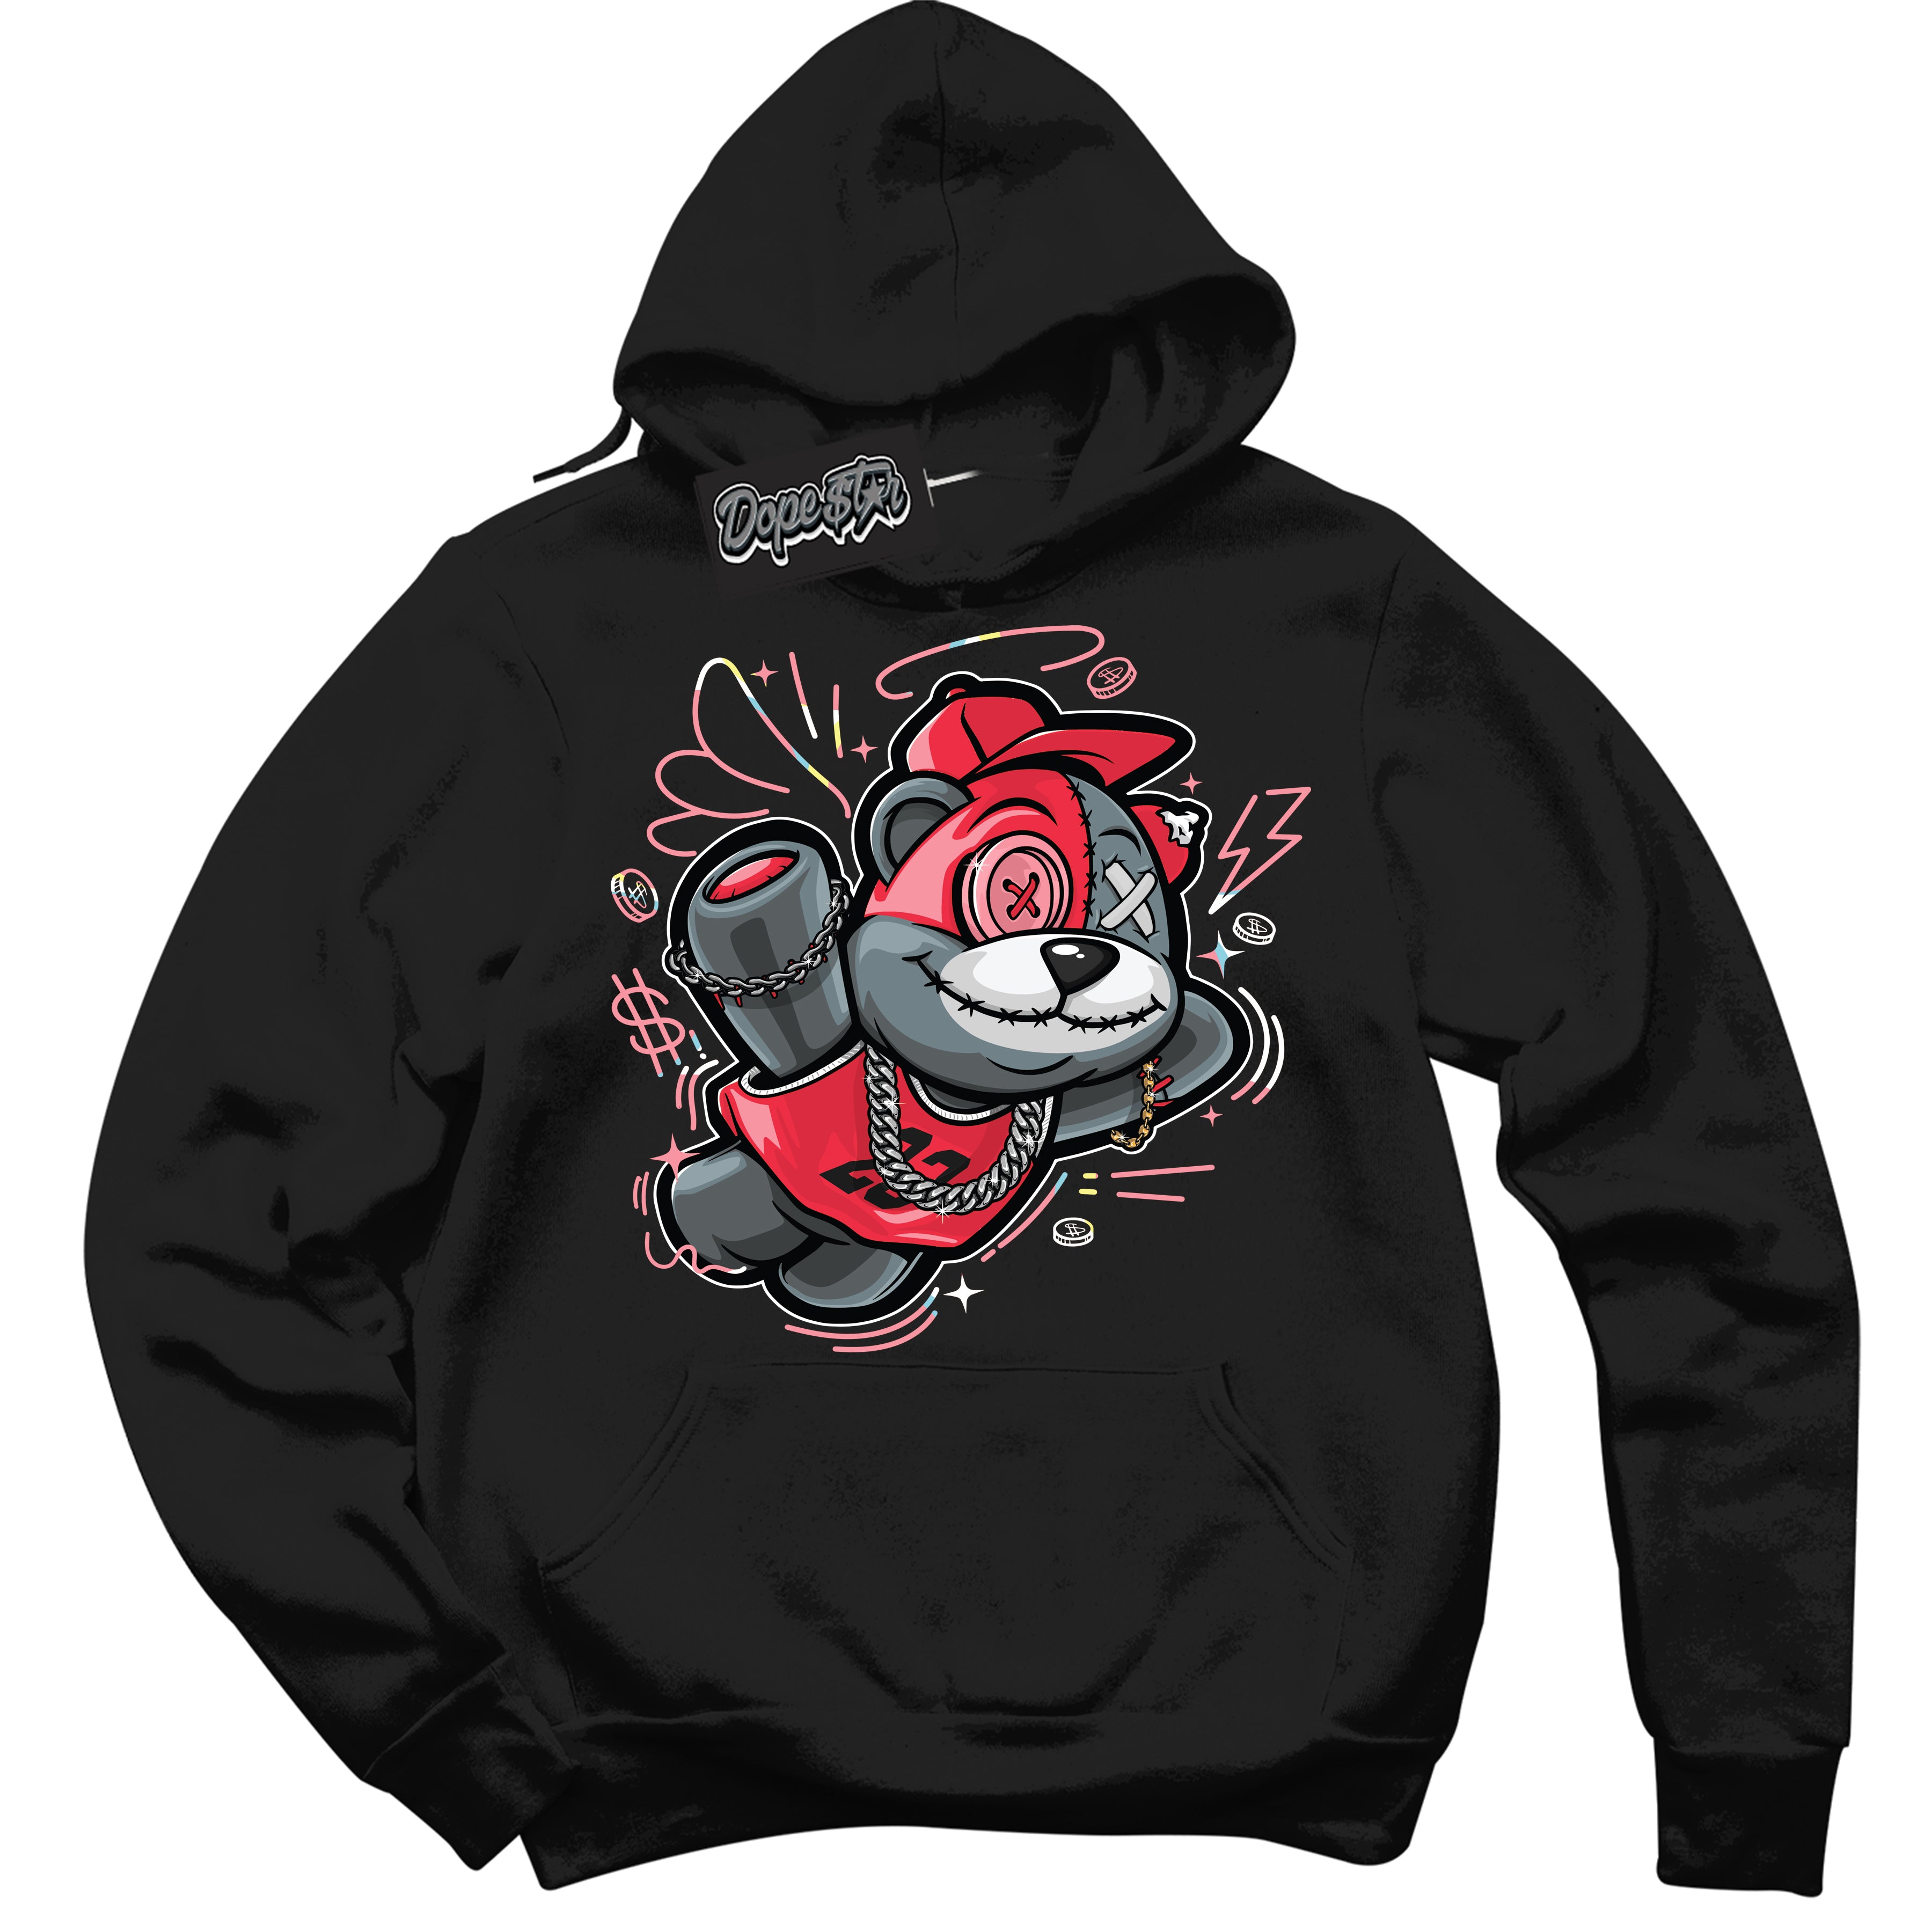 Cool Black Graphic DopeStar Hoodie with “ Slam Dunk Bear “ print, that perfectly matches Spider-Verse 1s sneakers